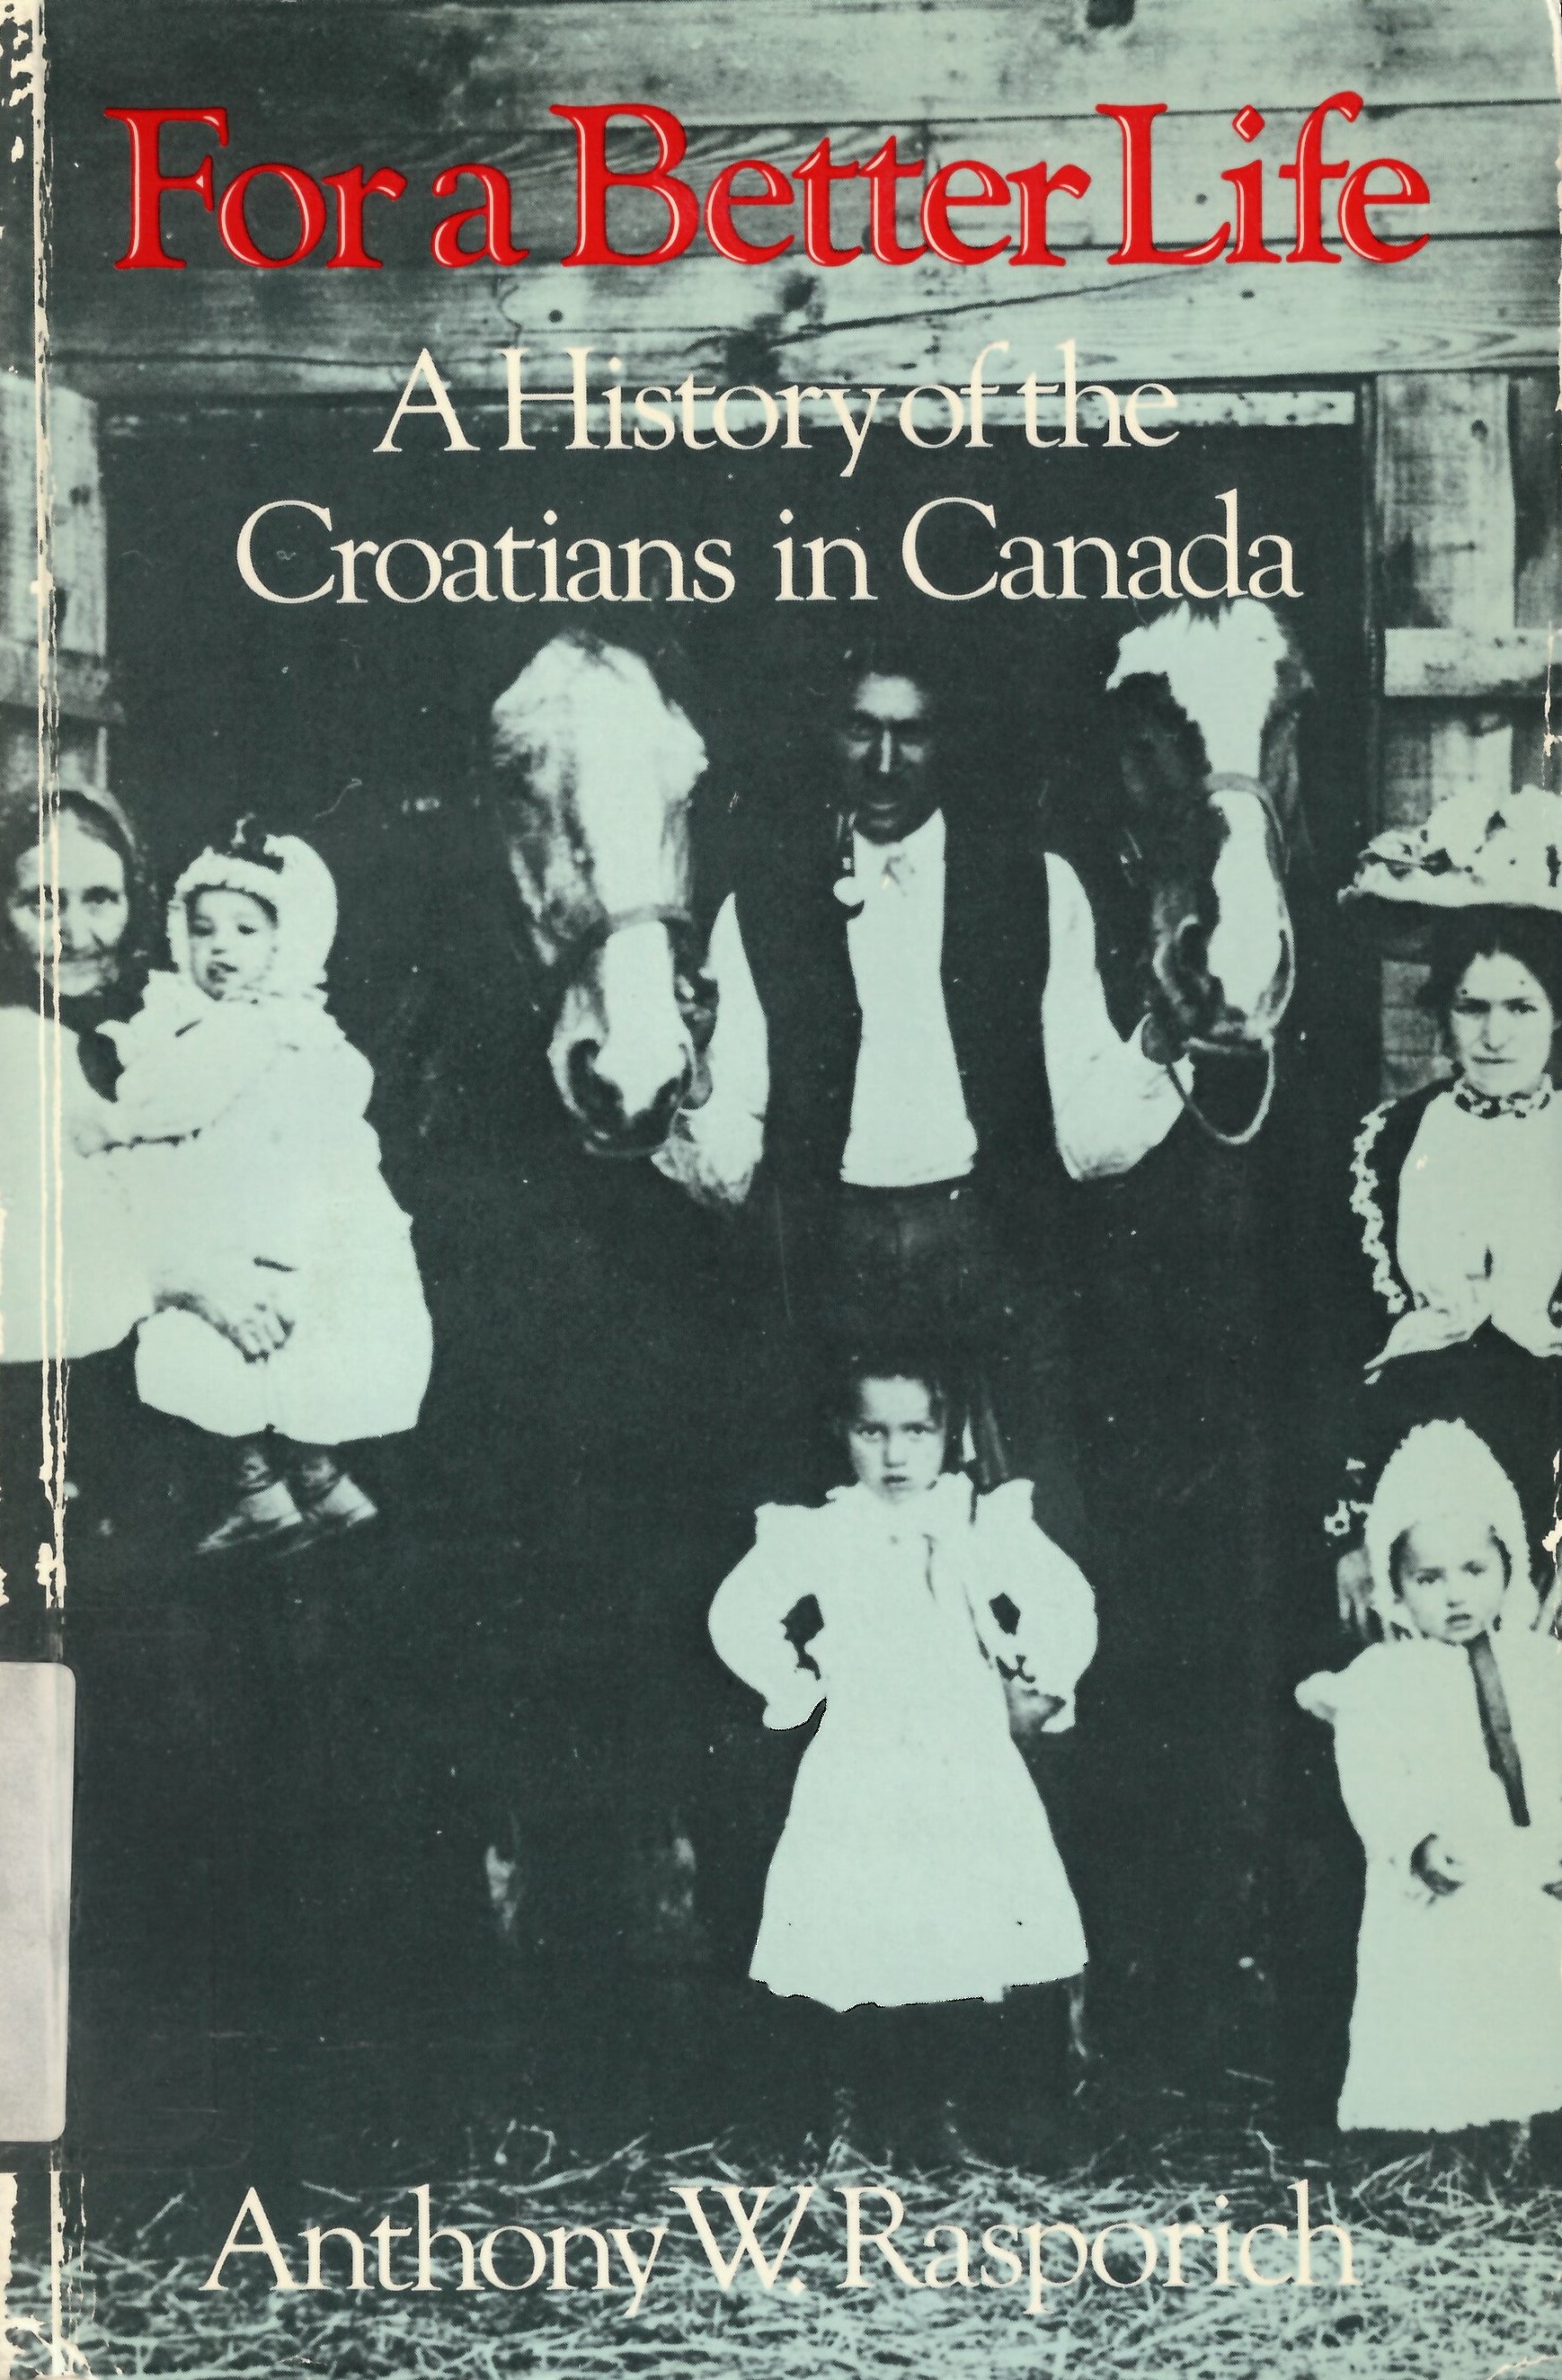 For a Better Life: a history of the Croatians in Canada /